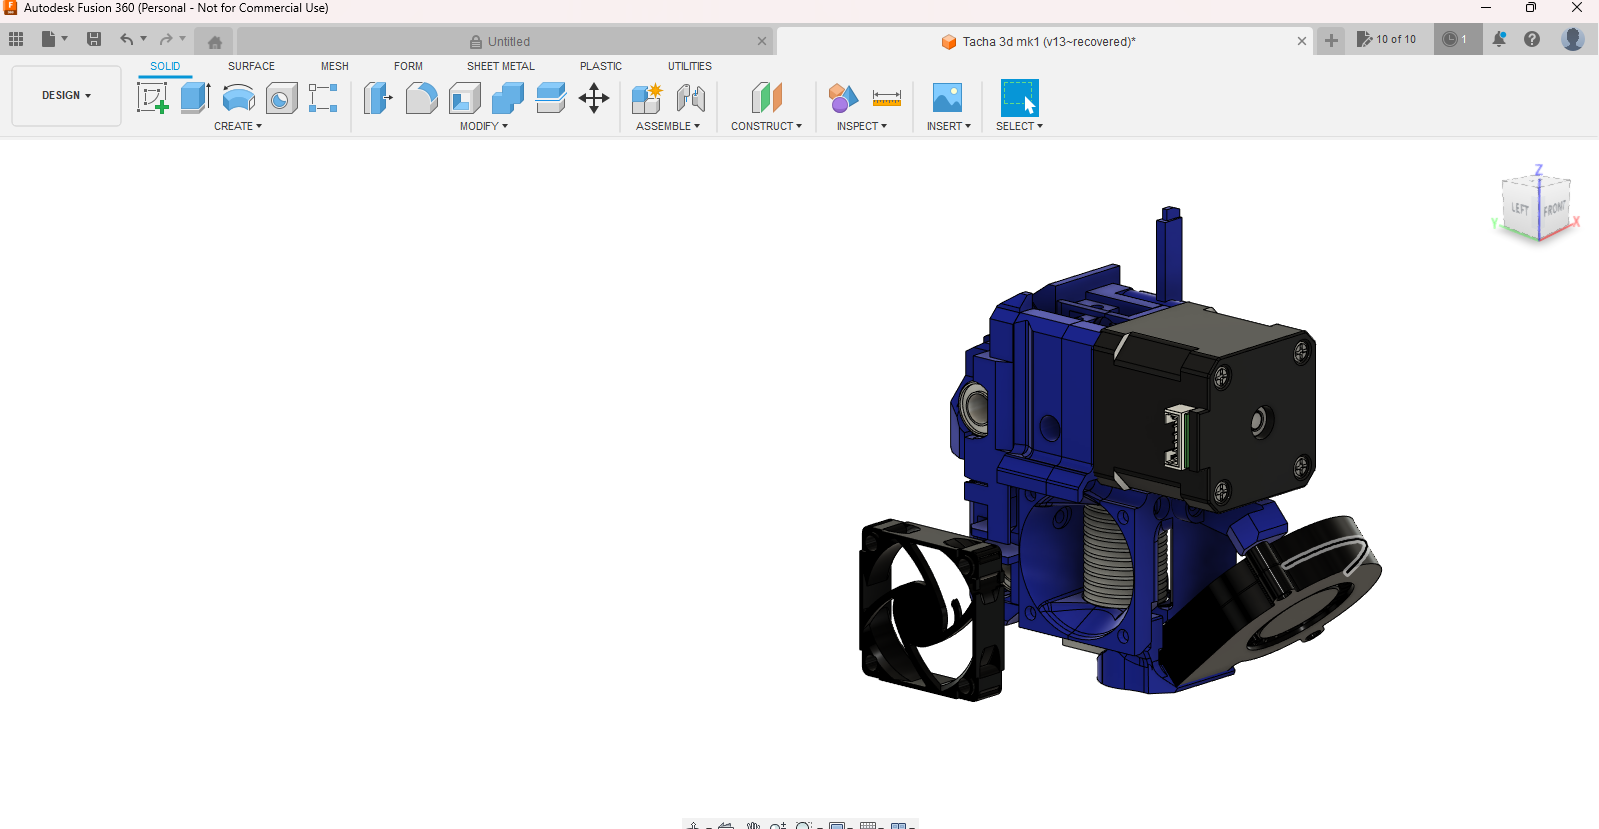 Autodesk Fusion 360 (Personal - Not for Commercial Use) 6_29_2023 10_13_21 PM.png